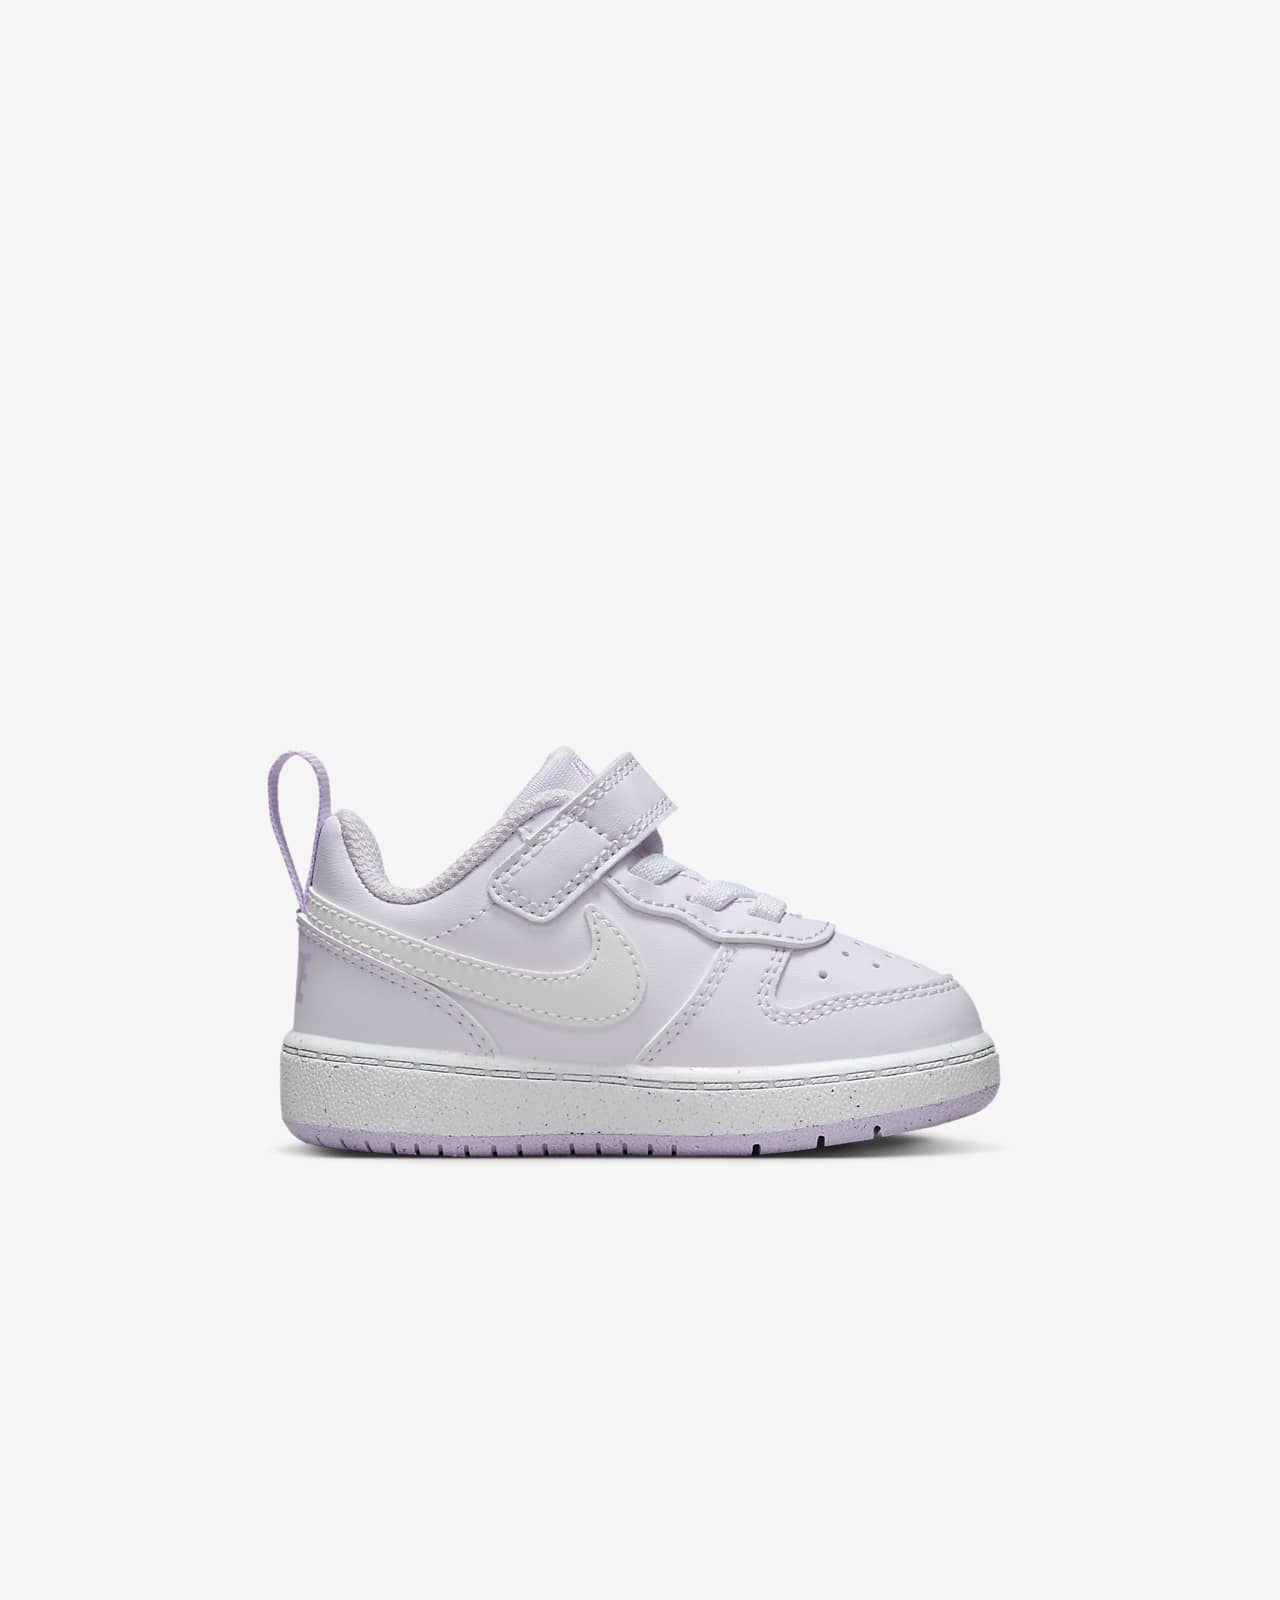 Nike Court Borough Low Shoes. Recraft Baby/Toddler